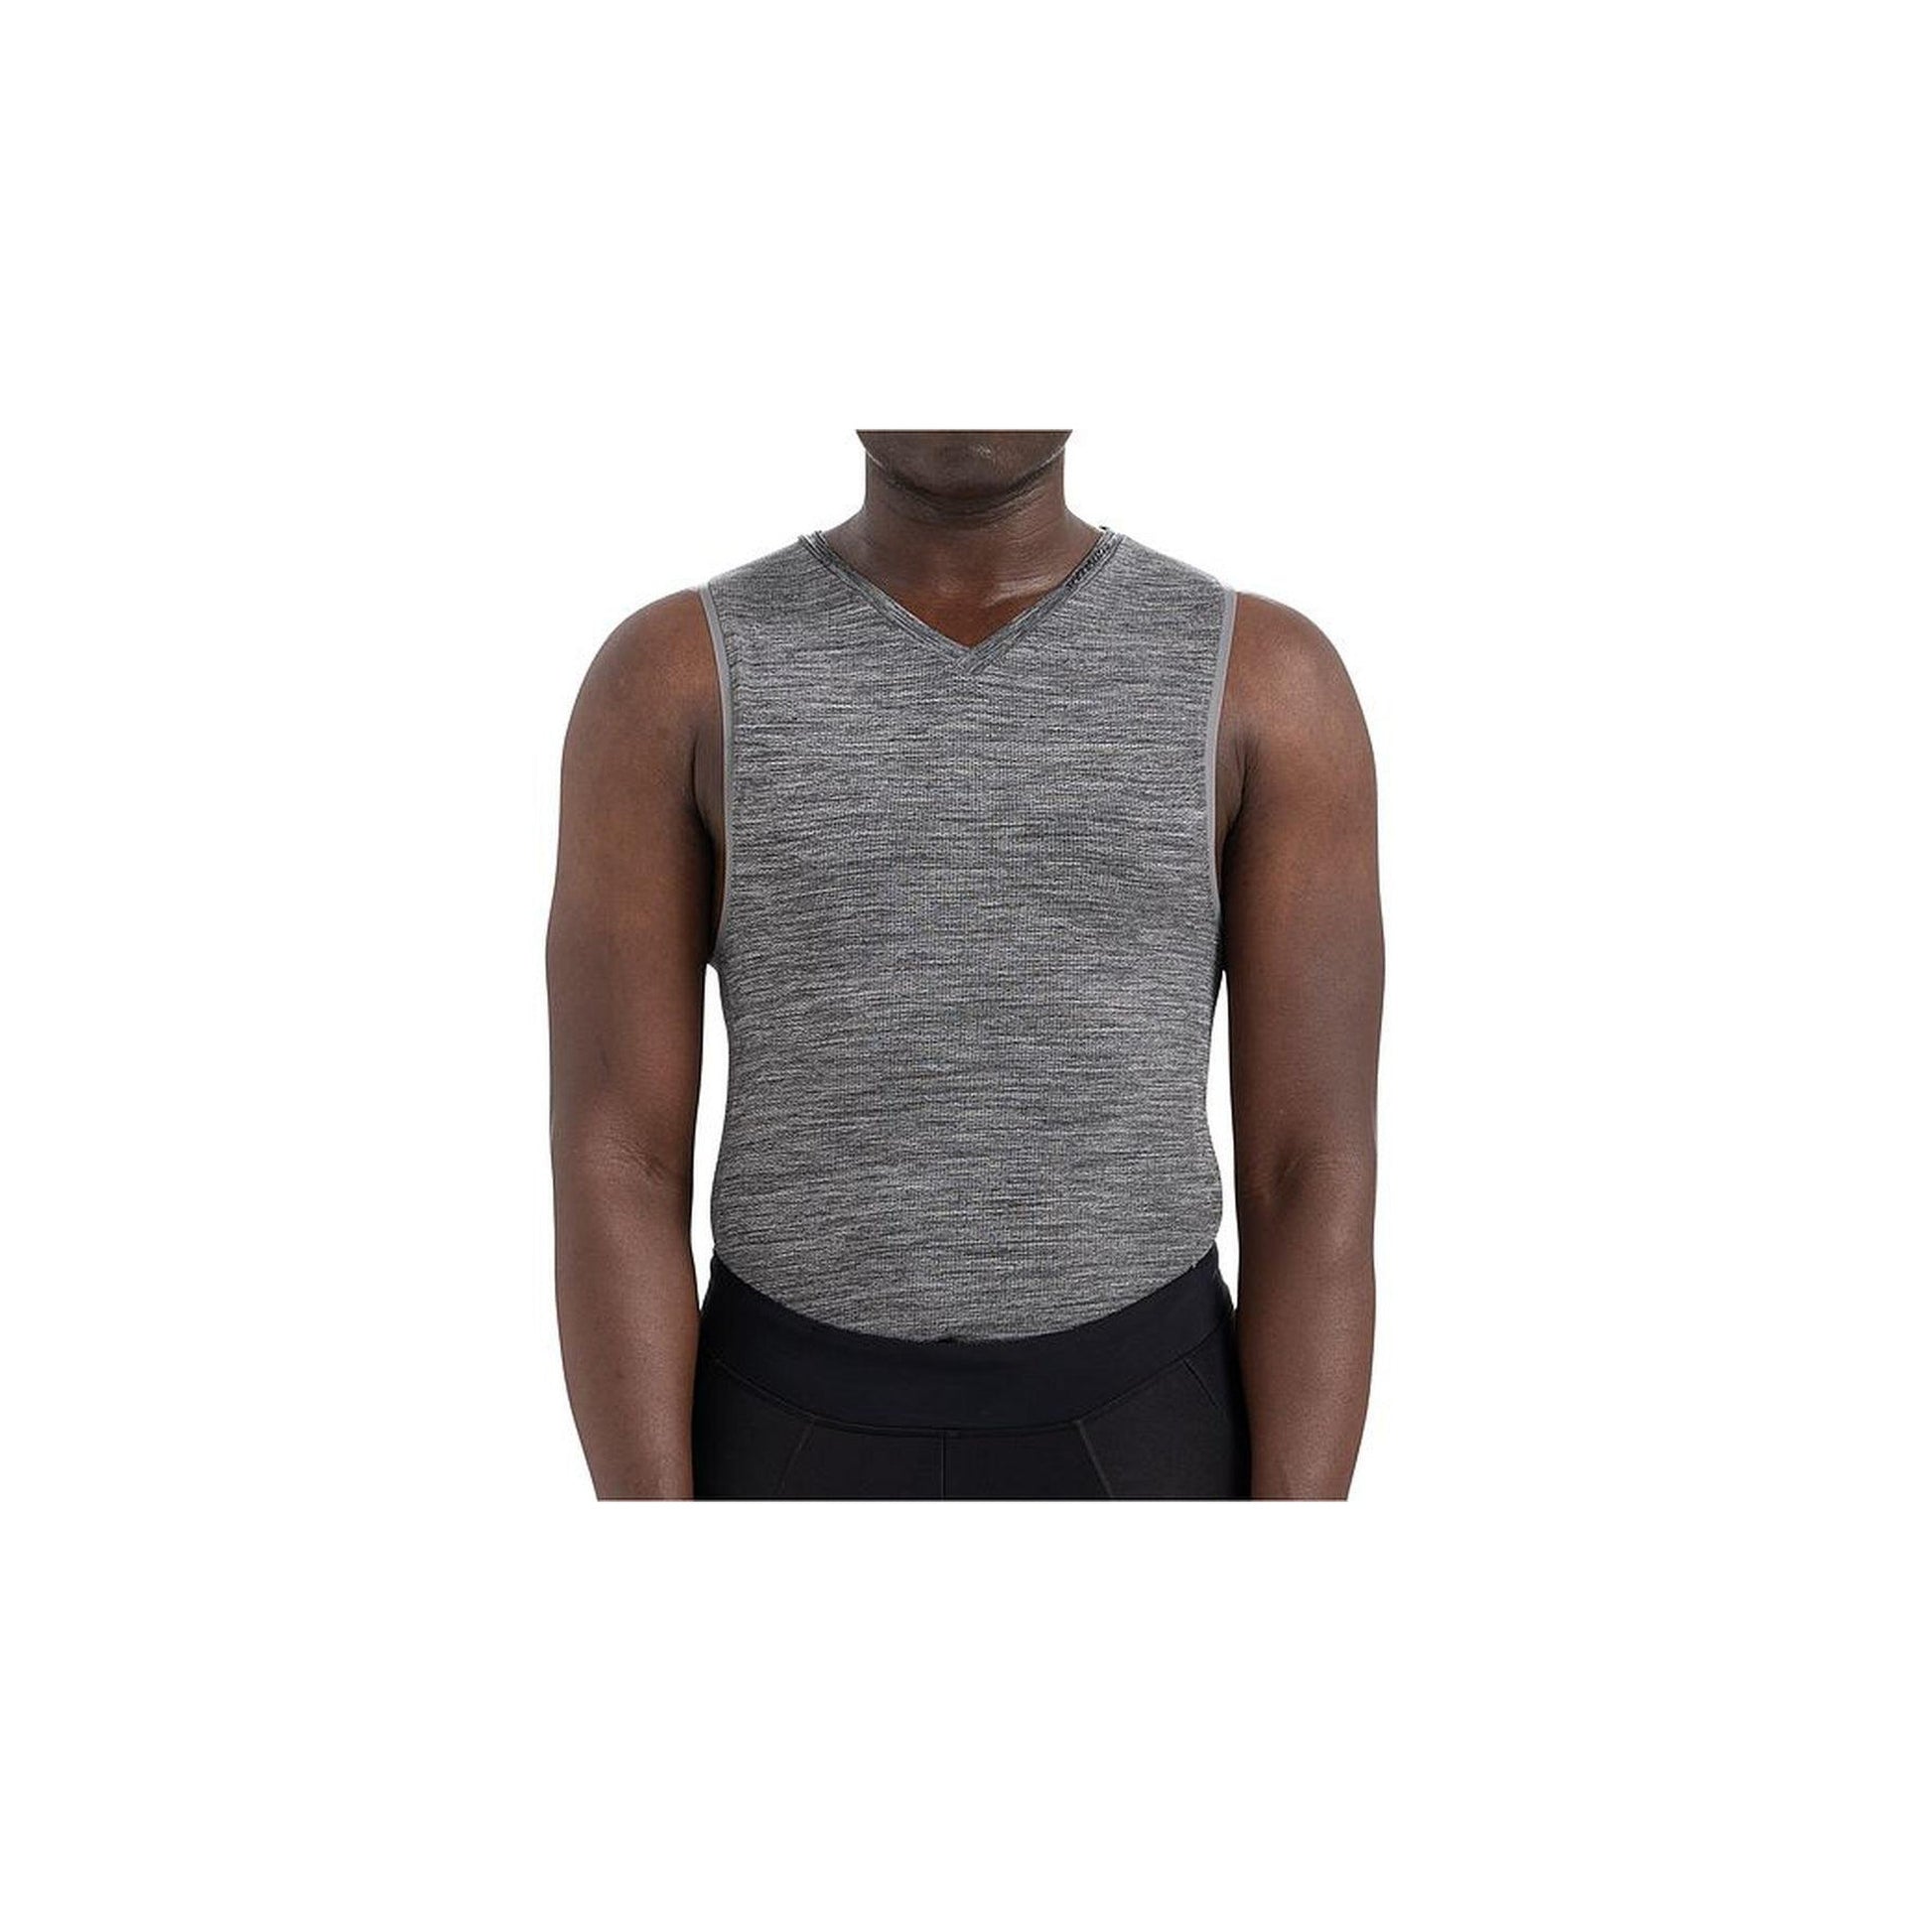 Seamless Sleevless Base Layer | completecyclist - For technical clothing designed to be next to skin, seamless construction reduces edges and stitches on your body that could be sources of irritation and